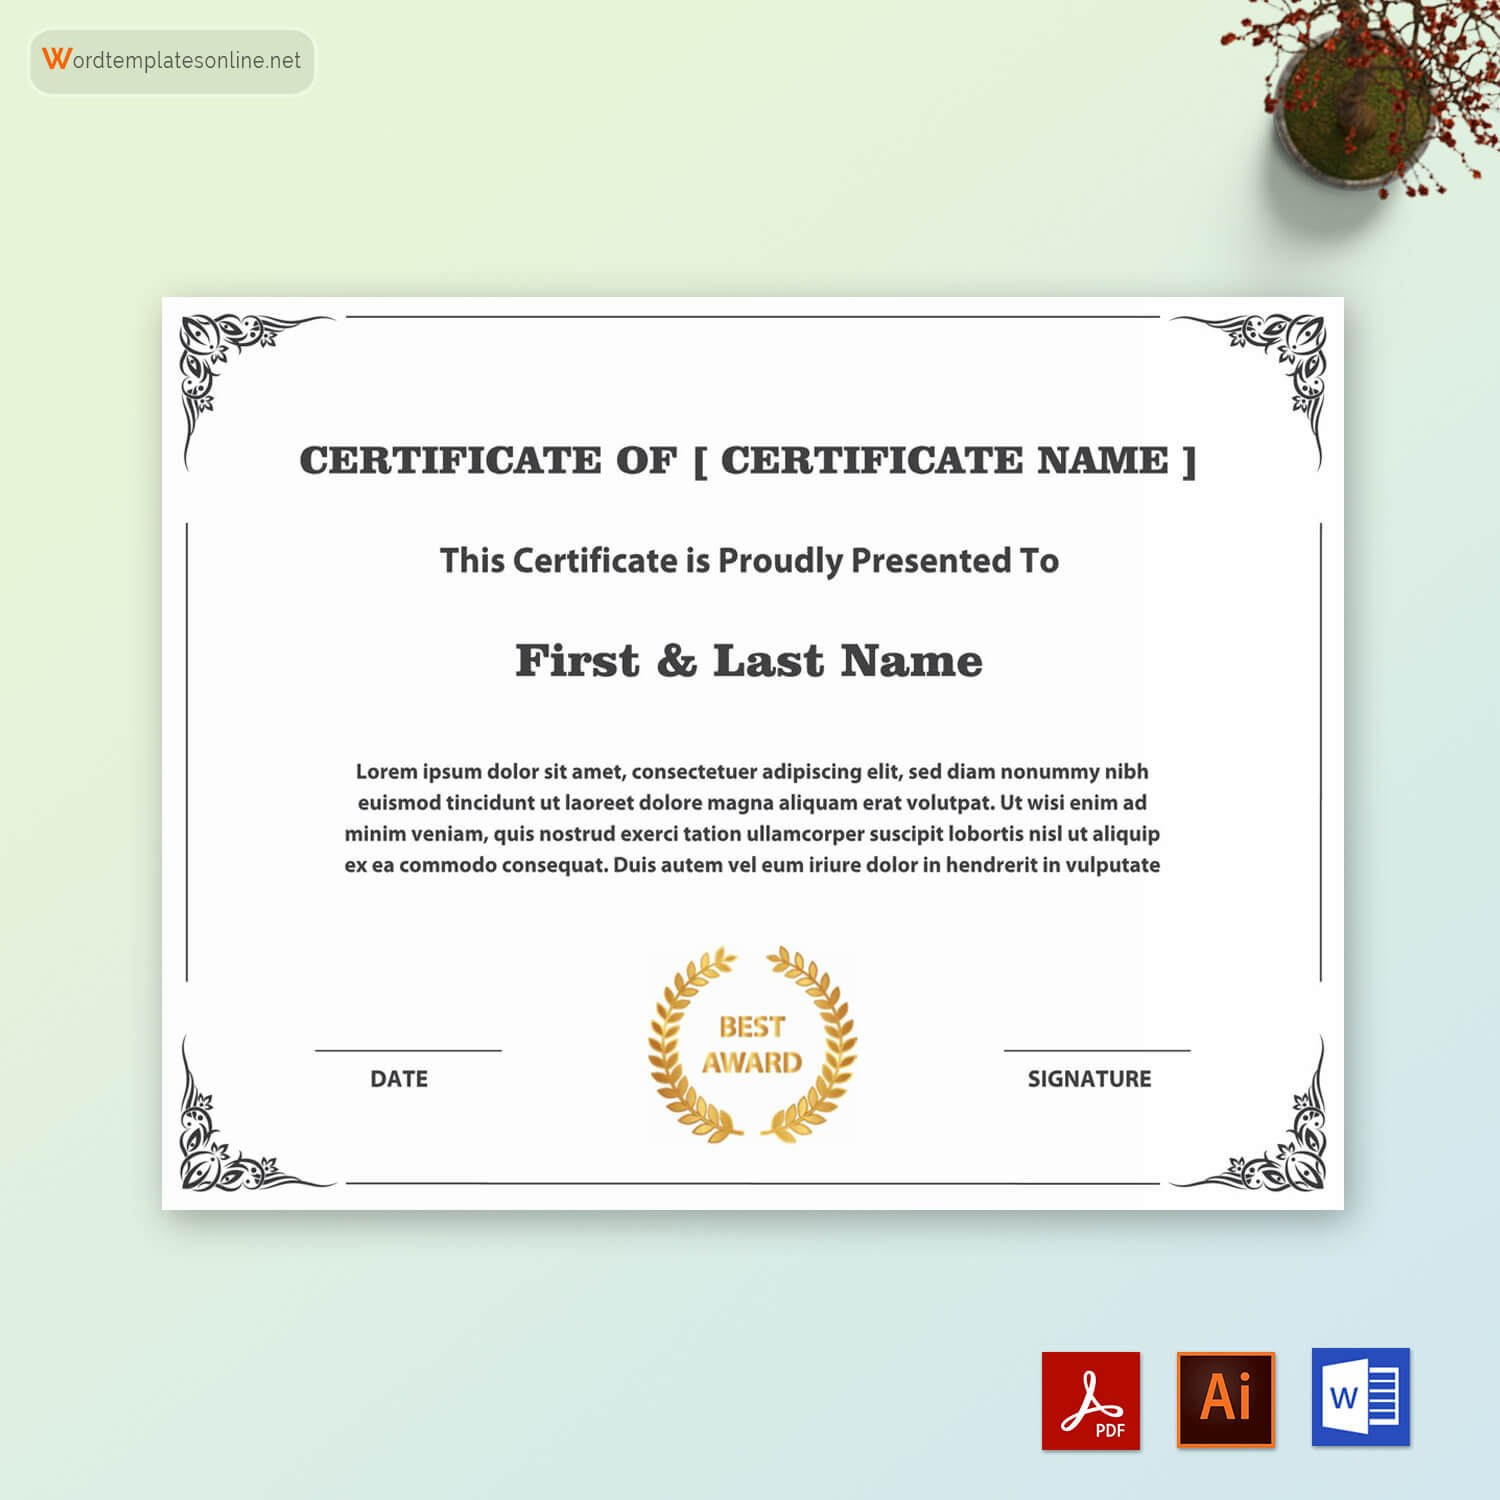 Example of award certificate template